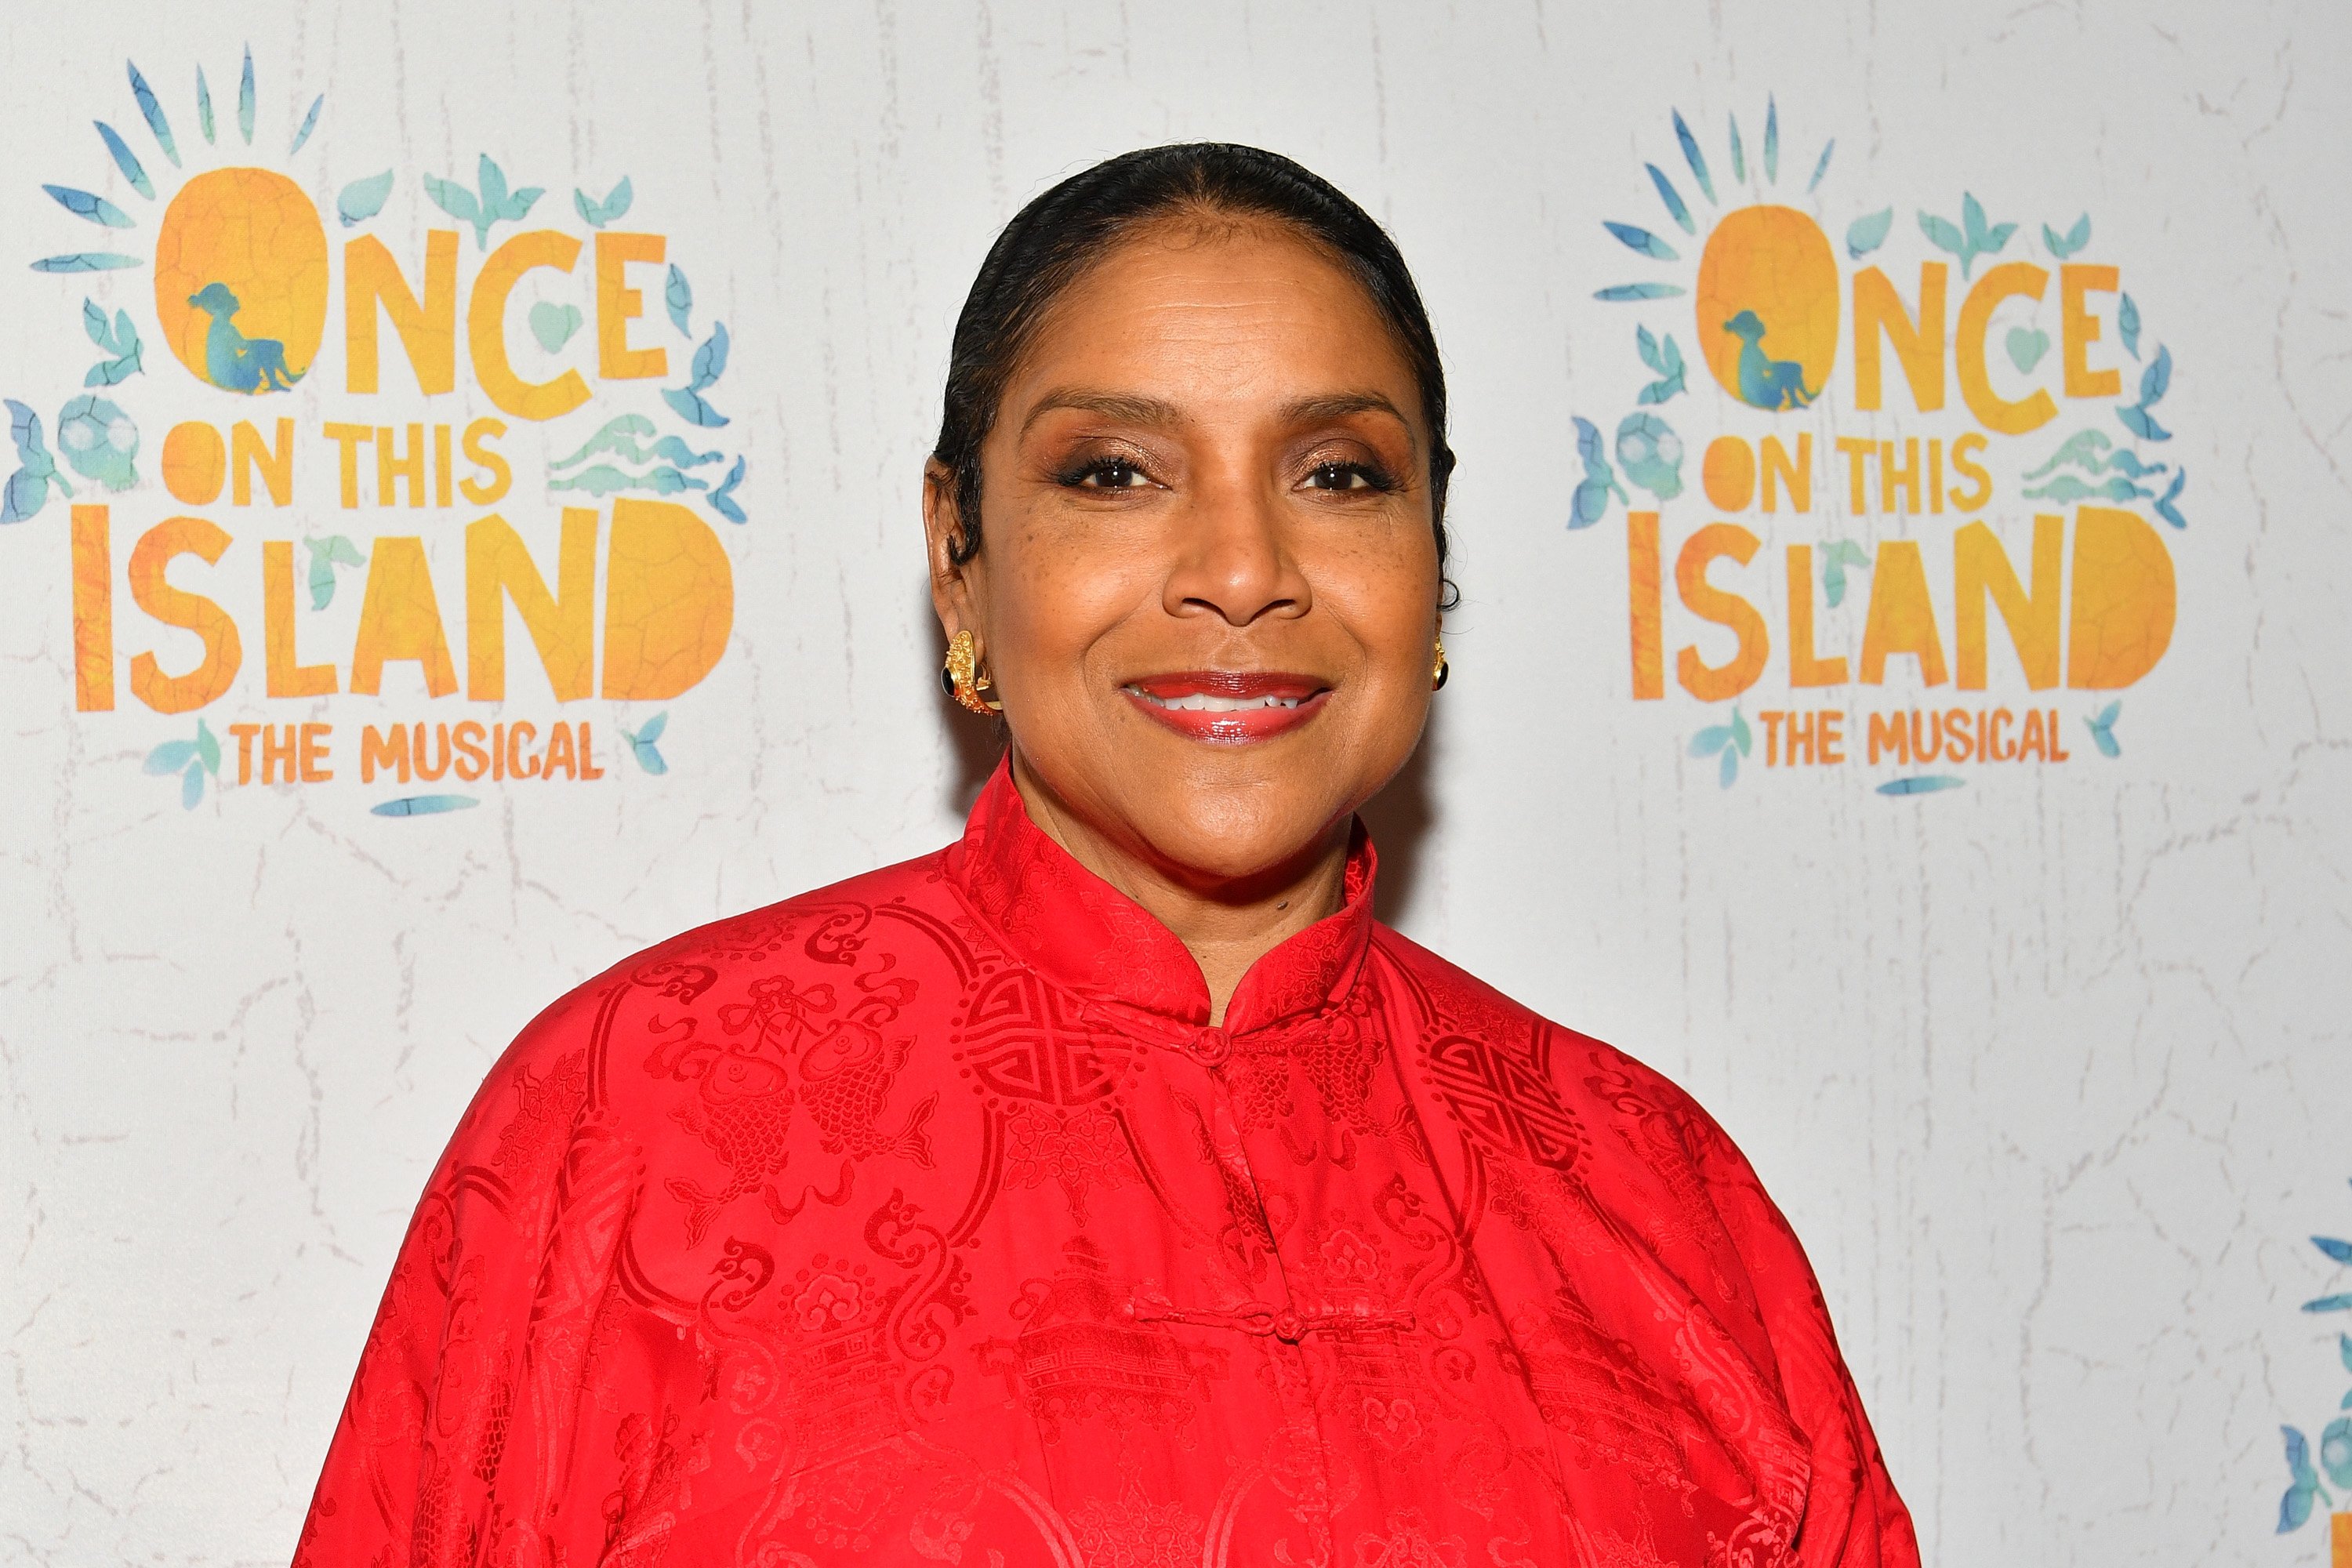 Phylicia Rashad attends the "Once On This Island" Broadway Opening Night at Circle in the Square Theatre on December 3, 2017 in New York City. | Photo: GettyImages